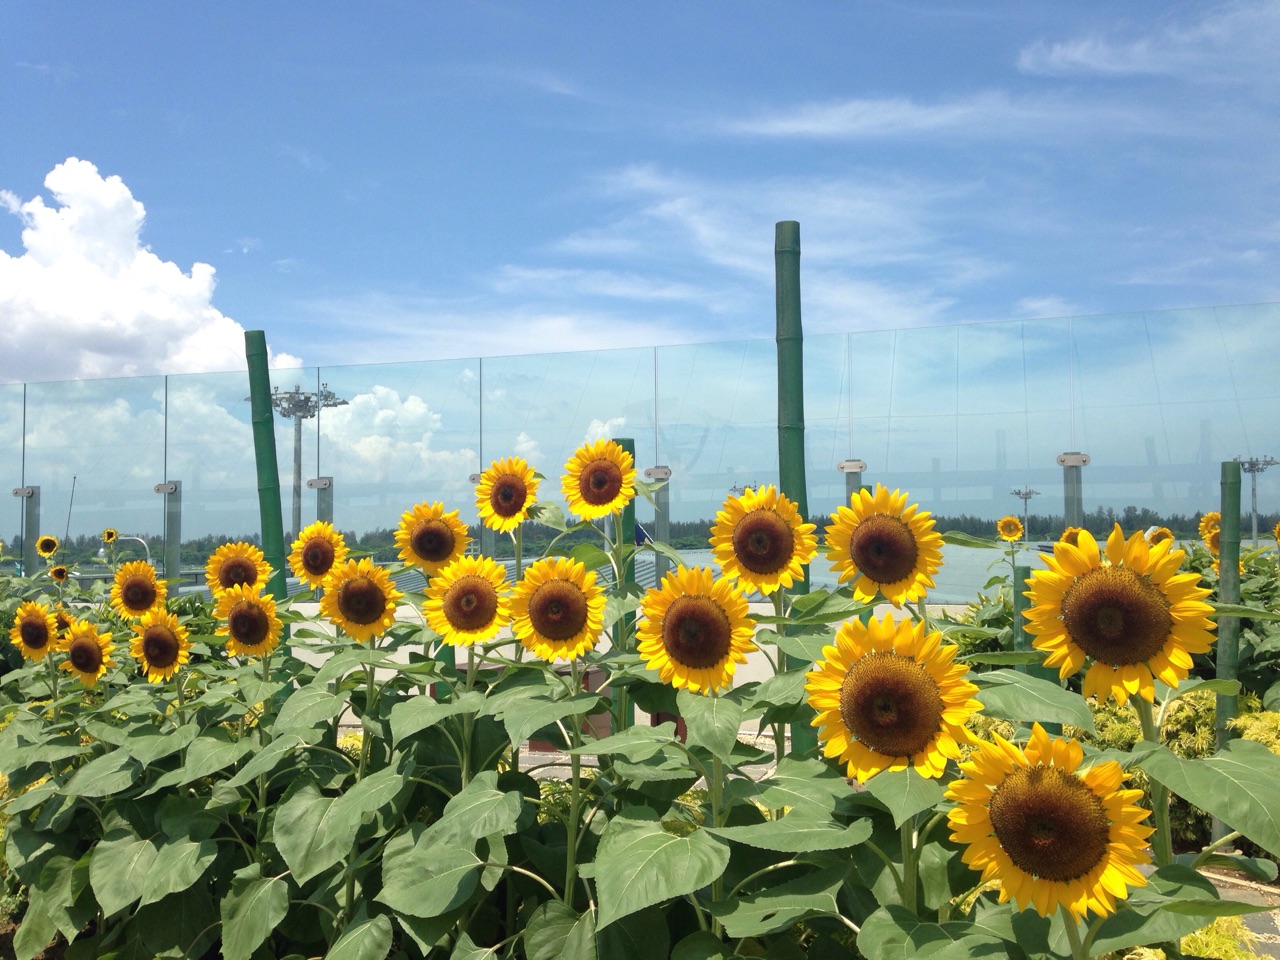 Picture of a bed of sunflowers at Changi Airport